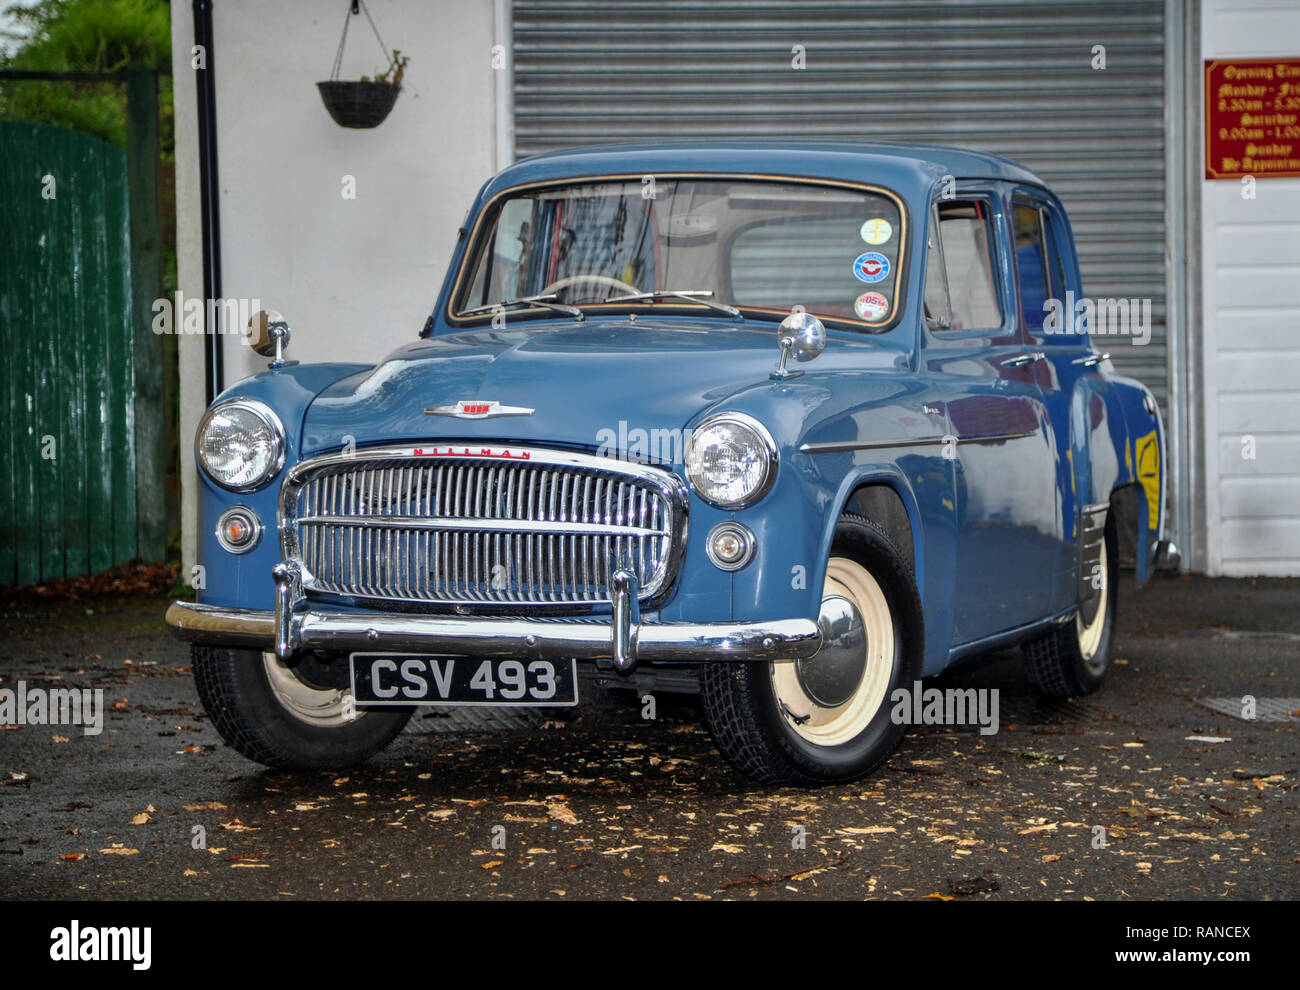 1955 Hillman Minx classic British car from the Rootes Group Stock Photo